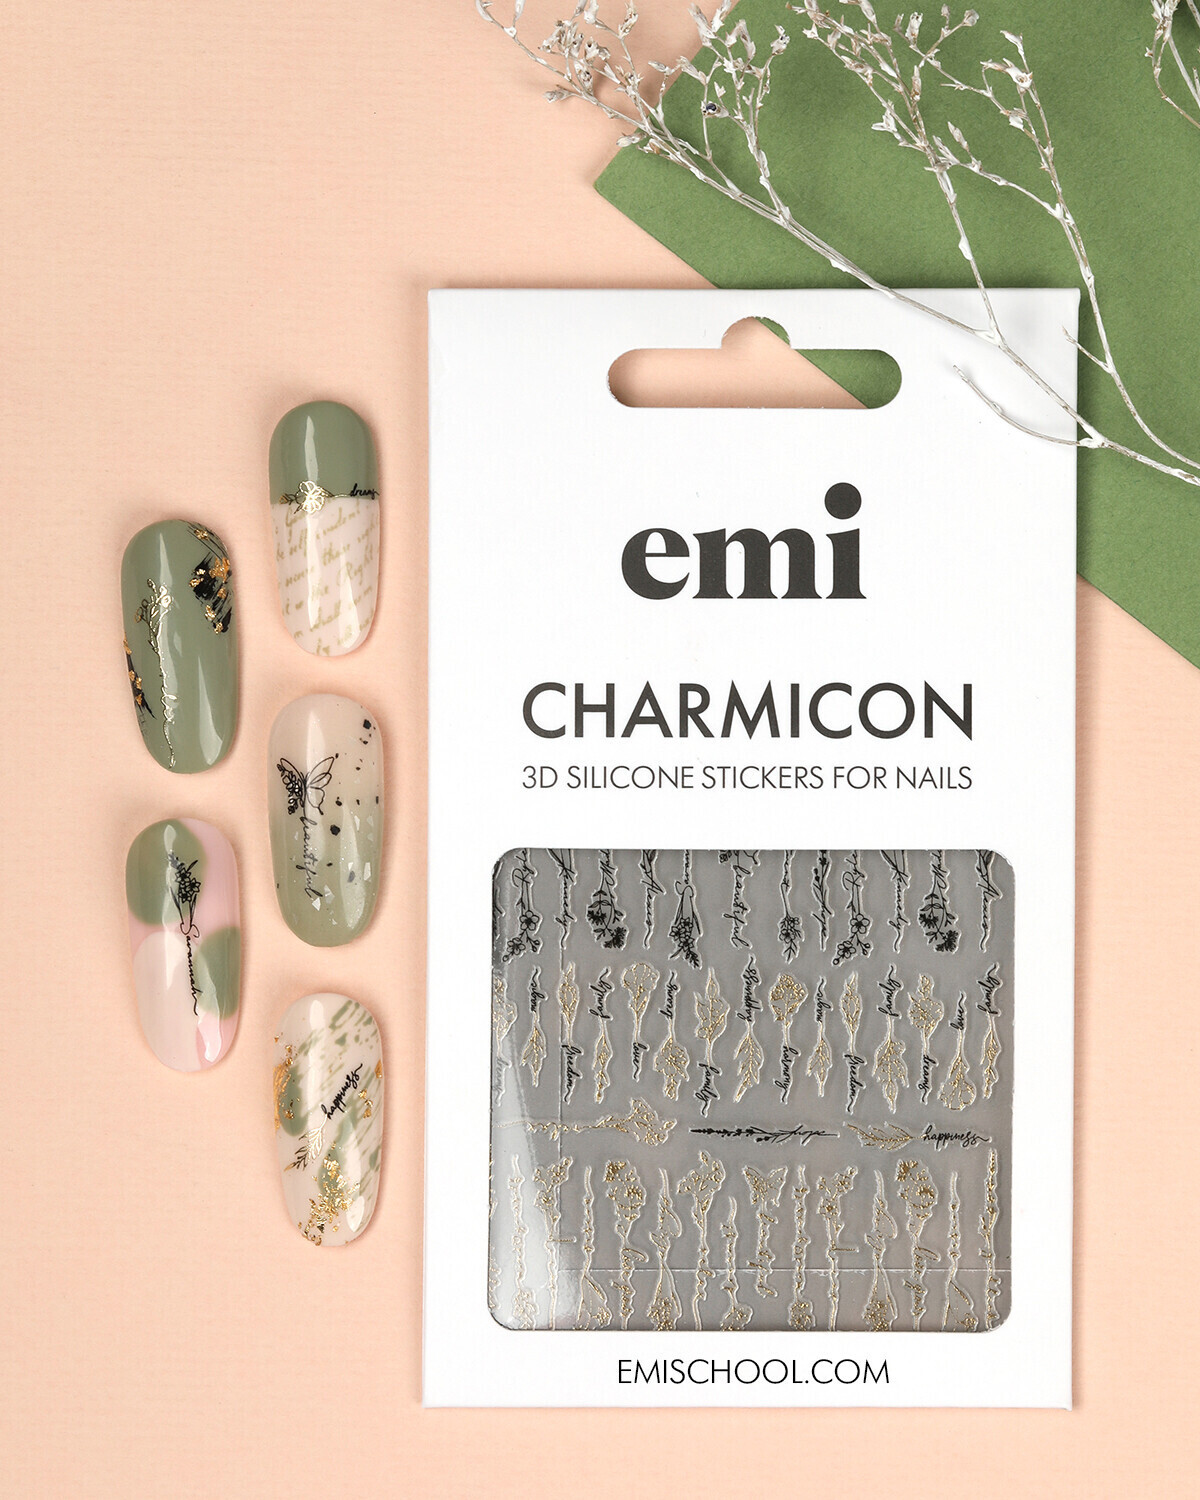 EMI Charmicon 3D Silicone Stickers #231 Flowers and phrases